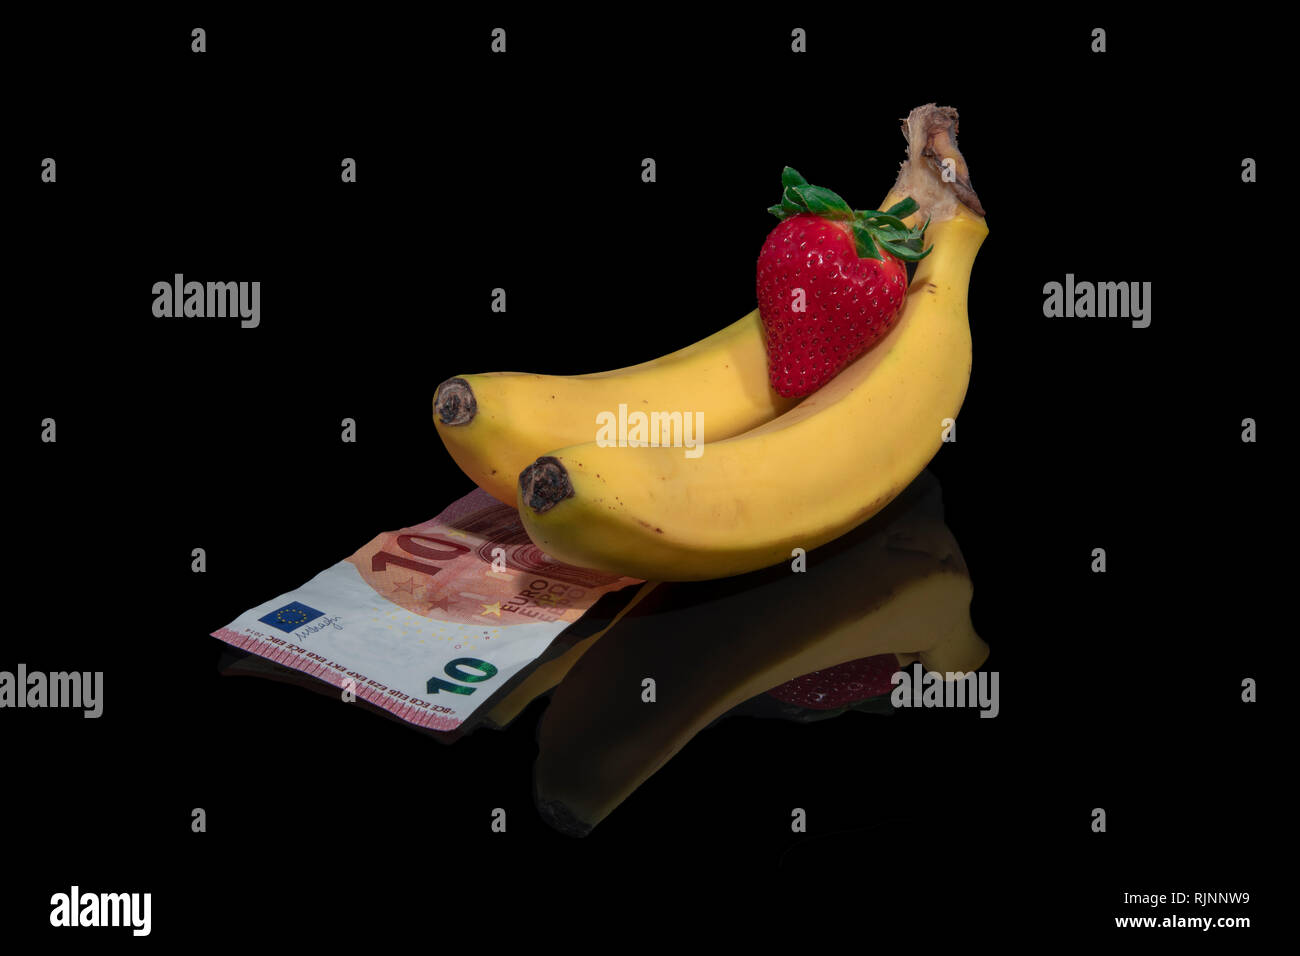 Two Bananas,strawberry and money with reflection on a black background Stock Photo